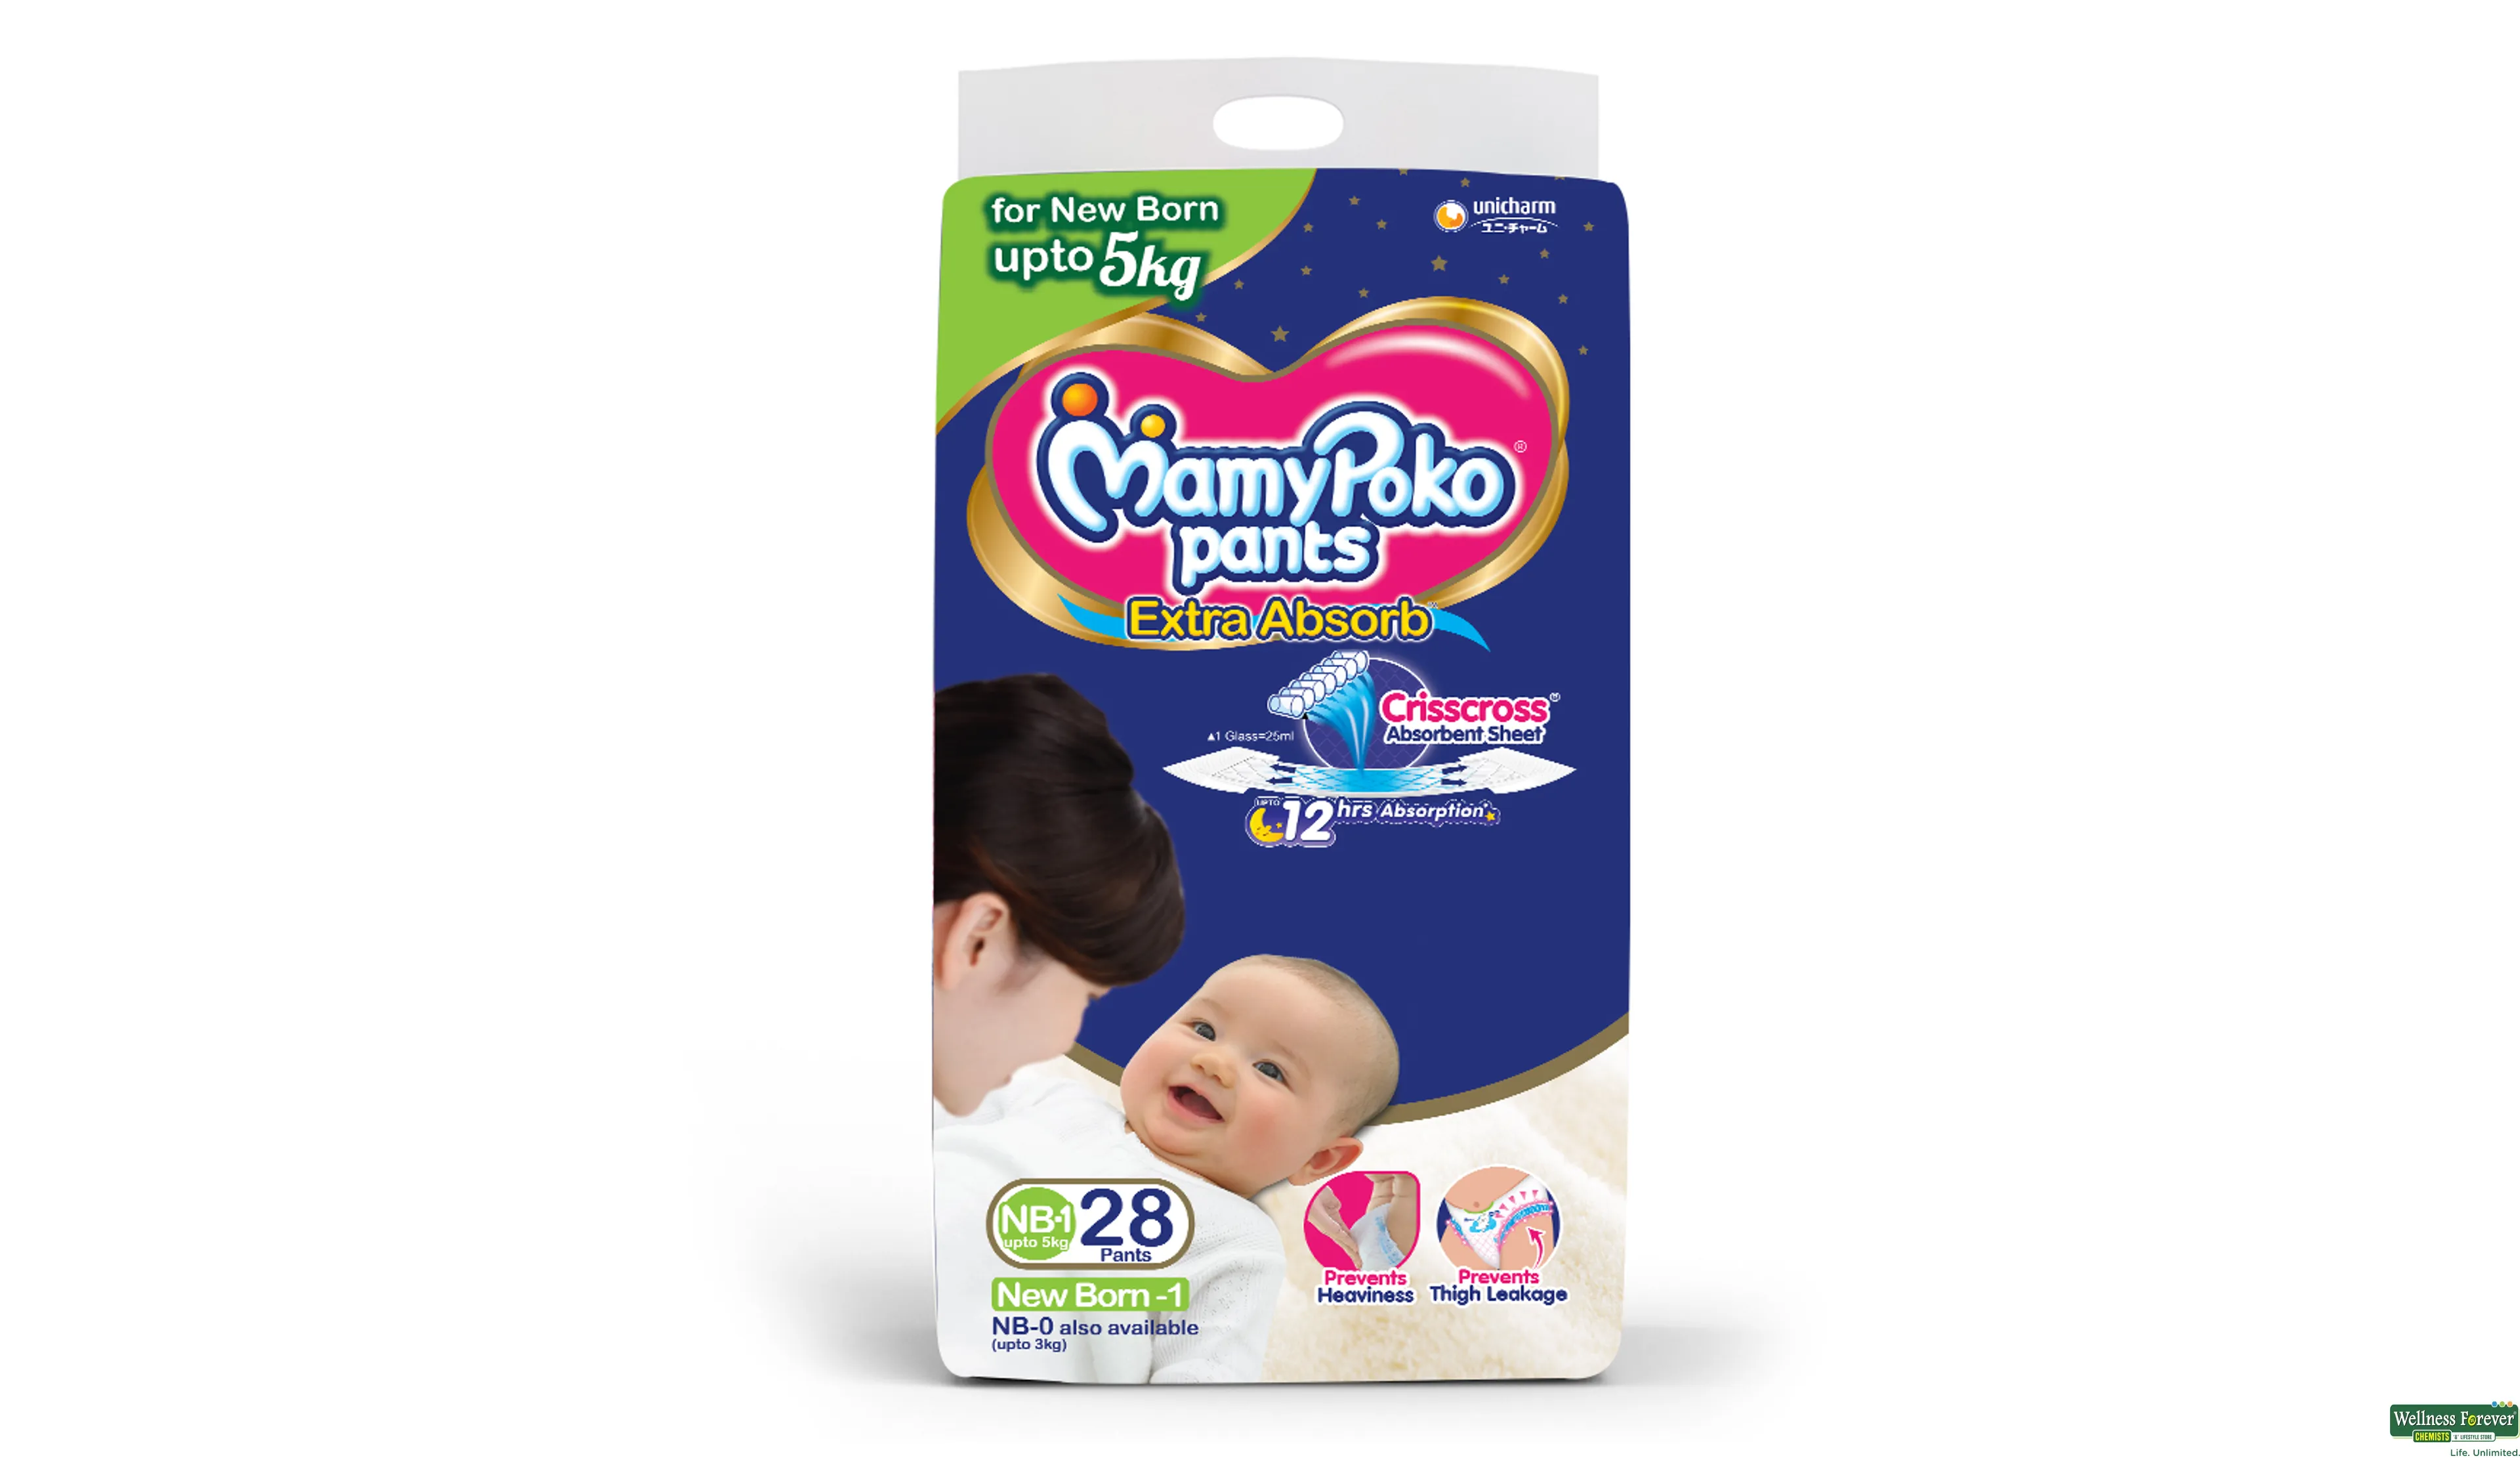 Buy Mamy Poko Pants Extra Absorb New Born-1 Online On DMart Ready